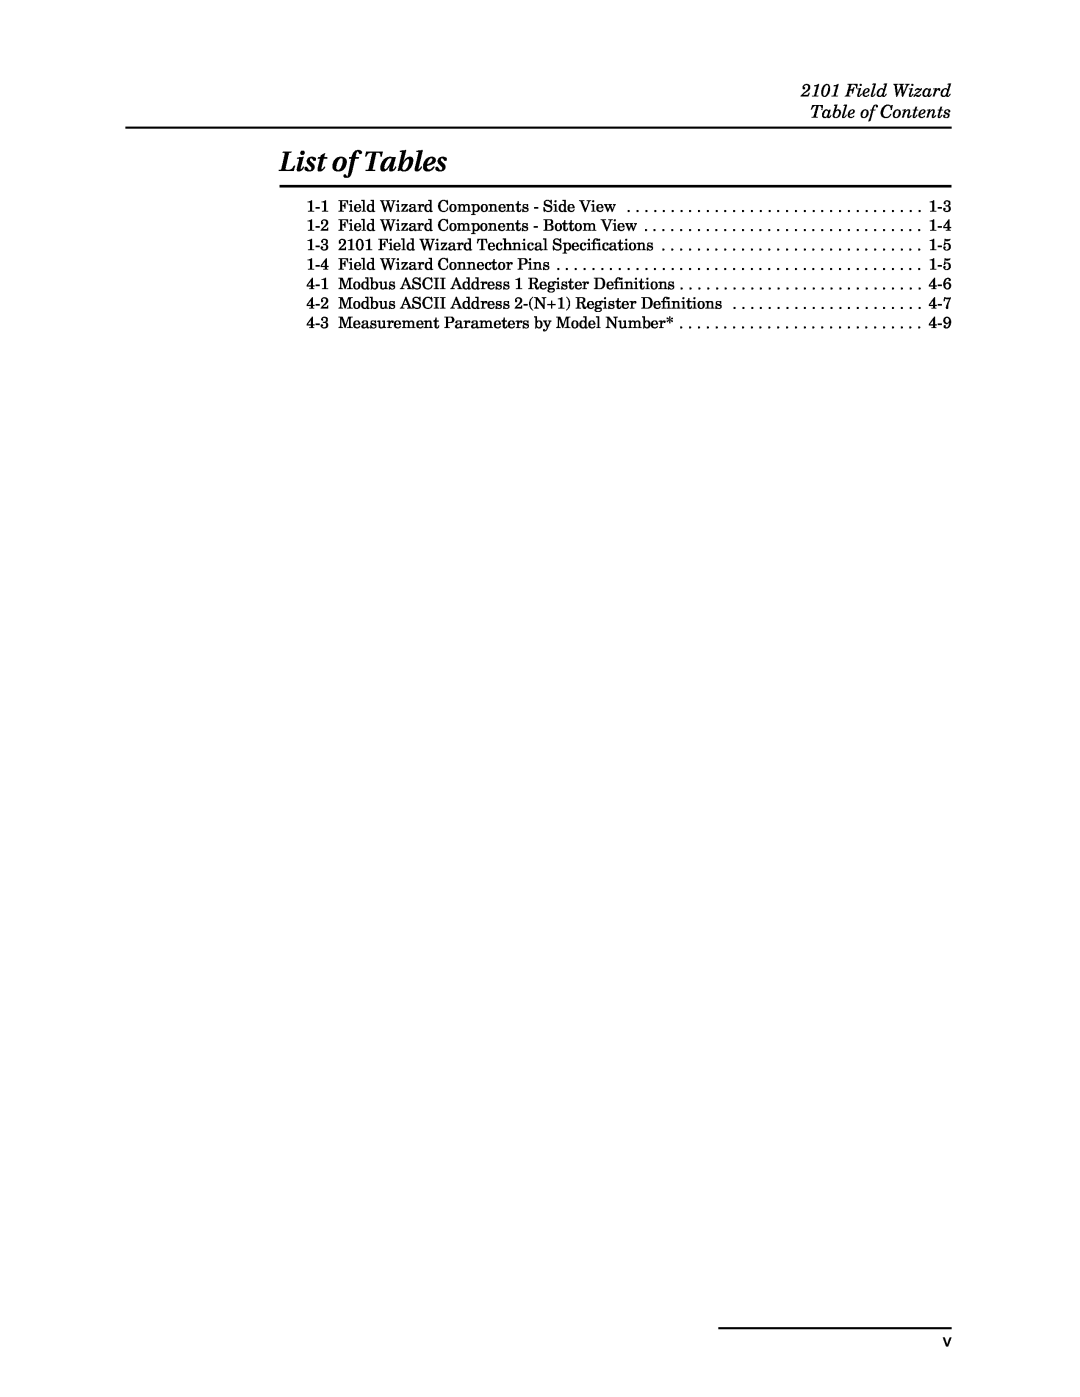 Teledyne 2101 installation and operation guide List of Tables, Field Wizard Table of Contents 